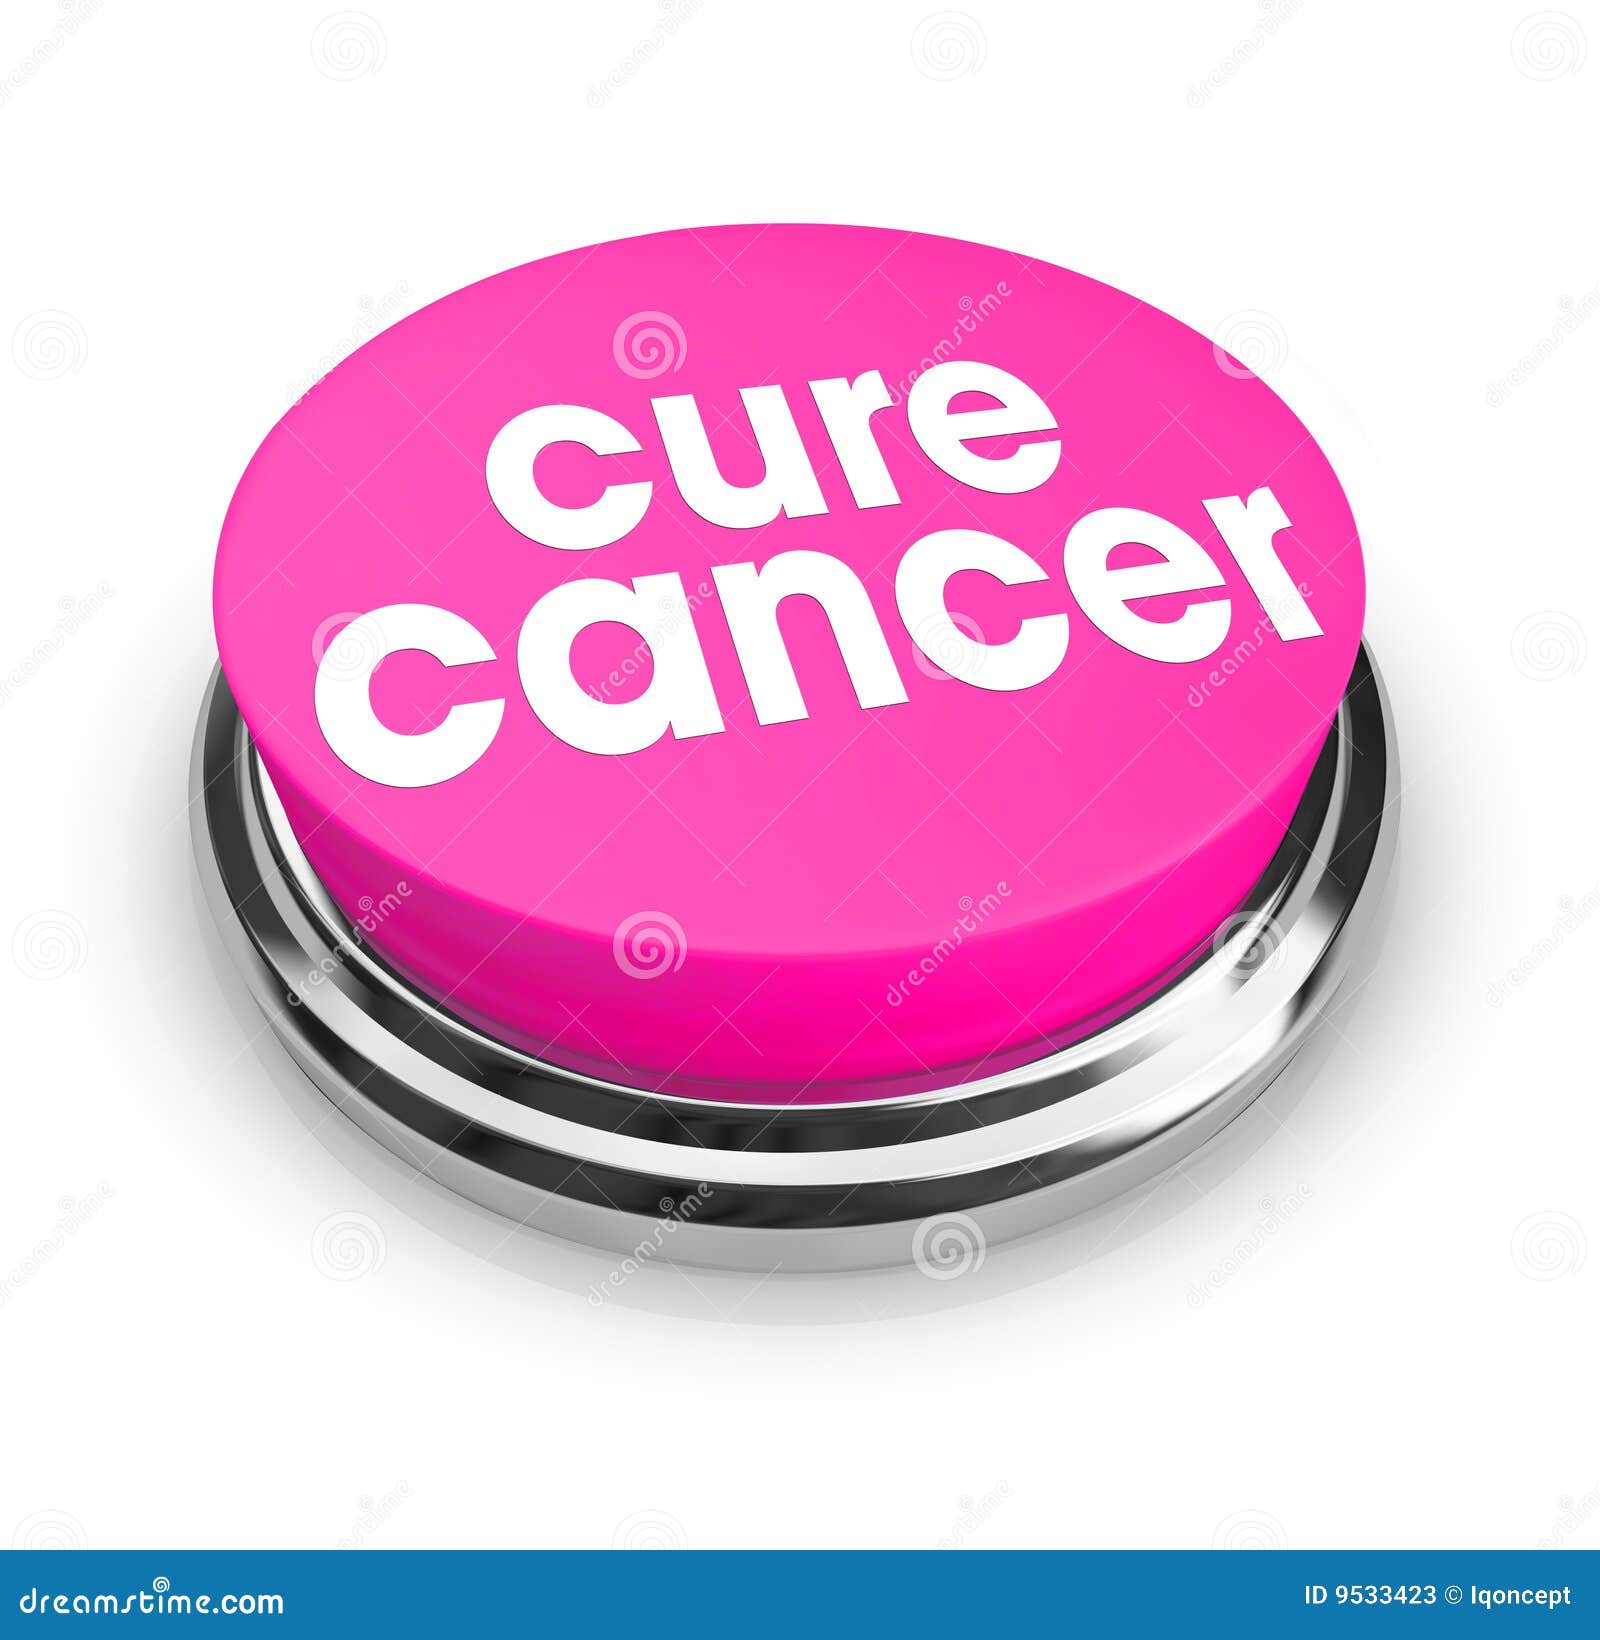 cure cancer - pink button